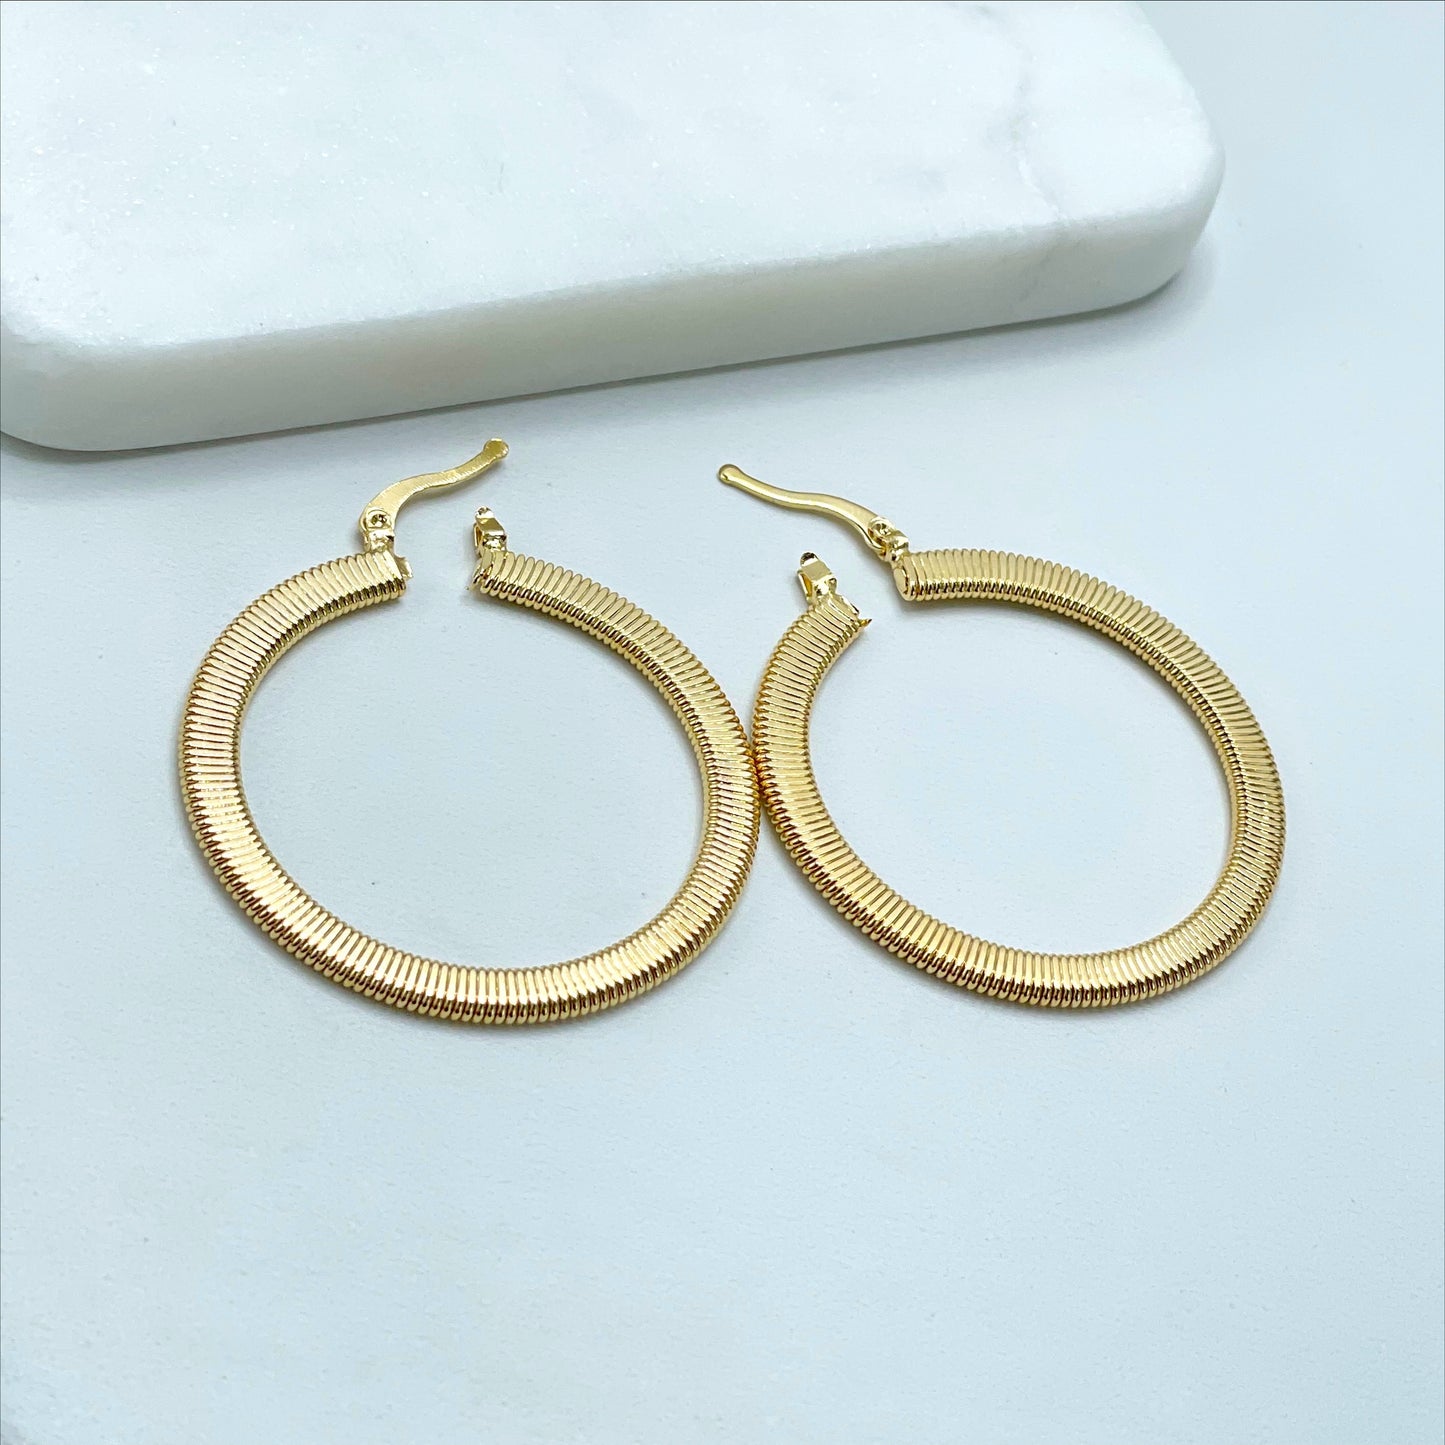 18k Gold Filled 45mm or 39mm Textured Hoops Earrings, Match Herringbone Design Wholesale Jewelry Making Supplies